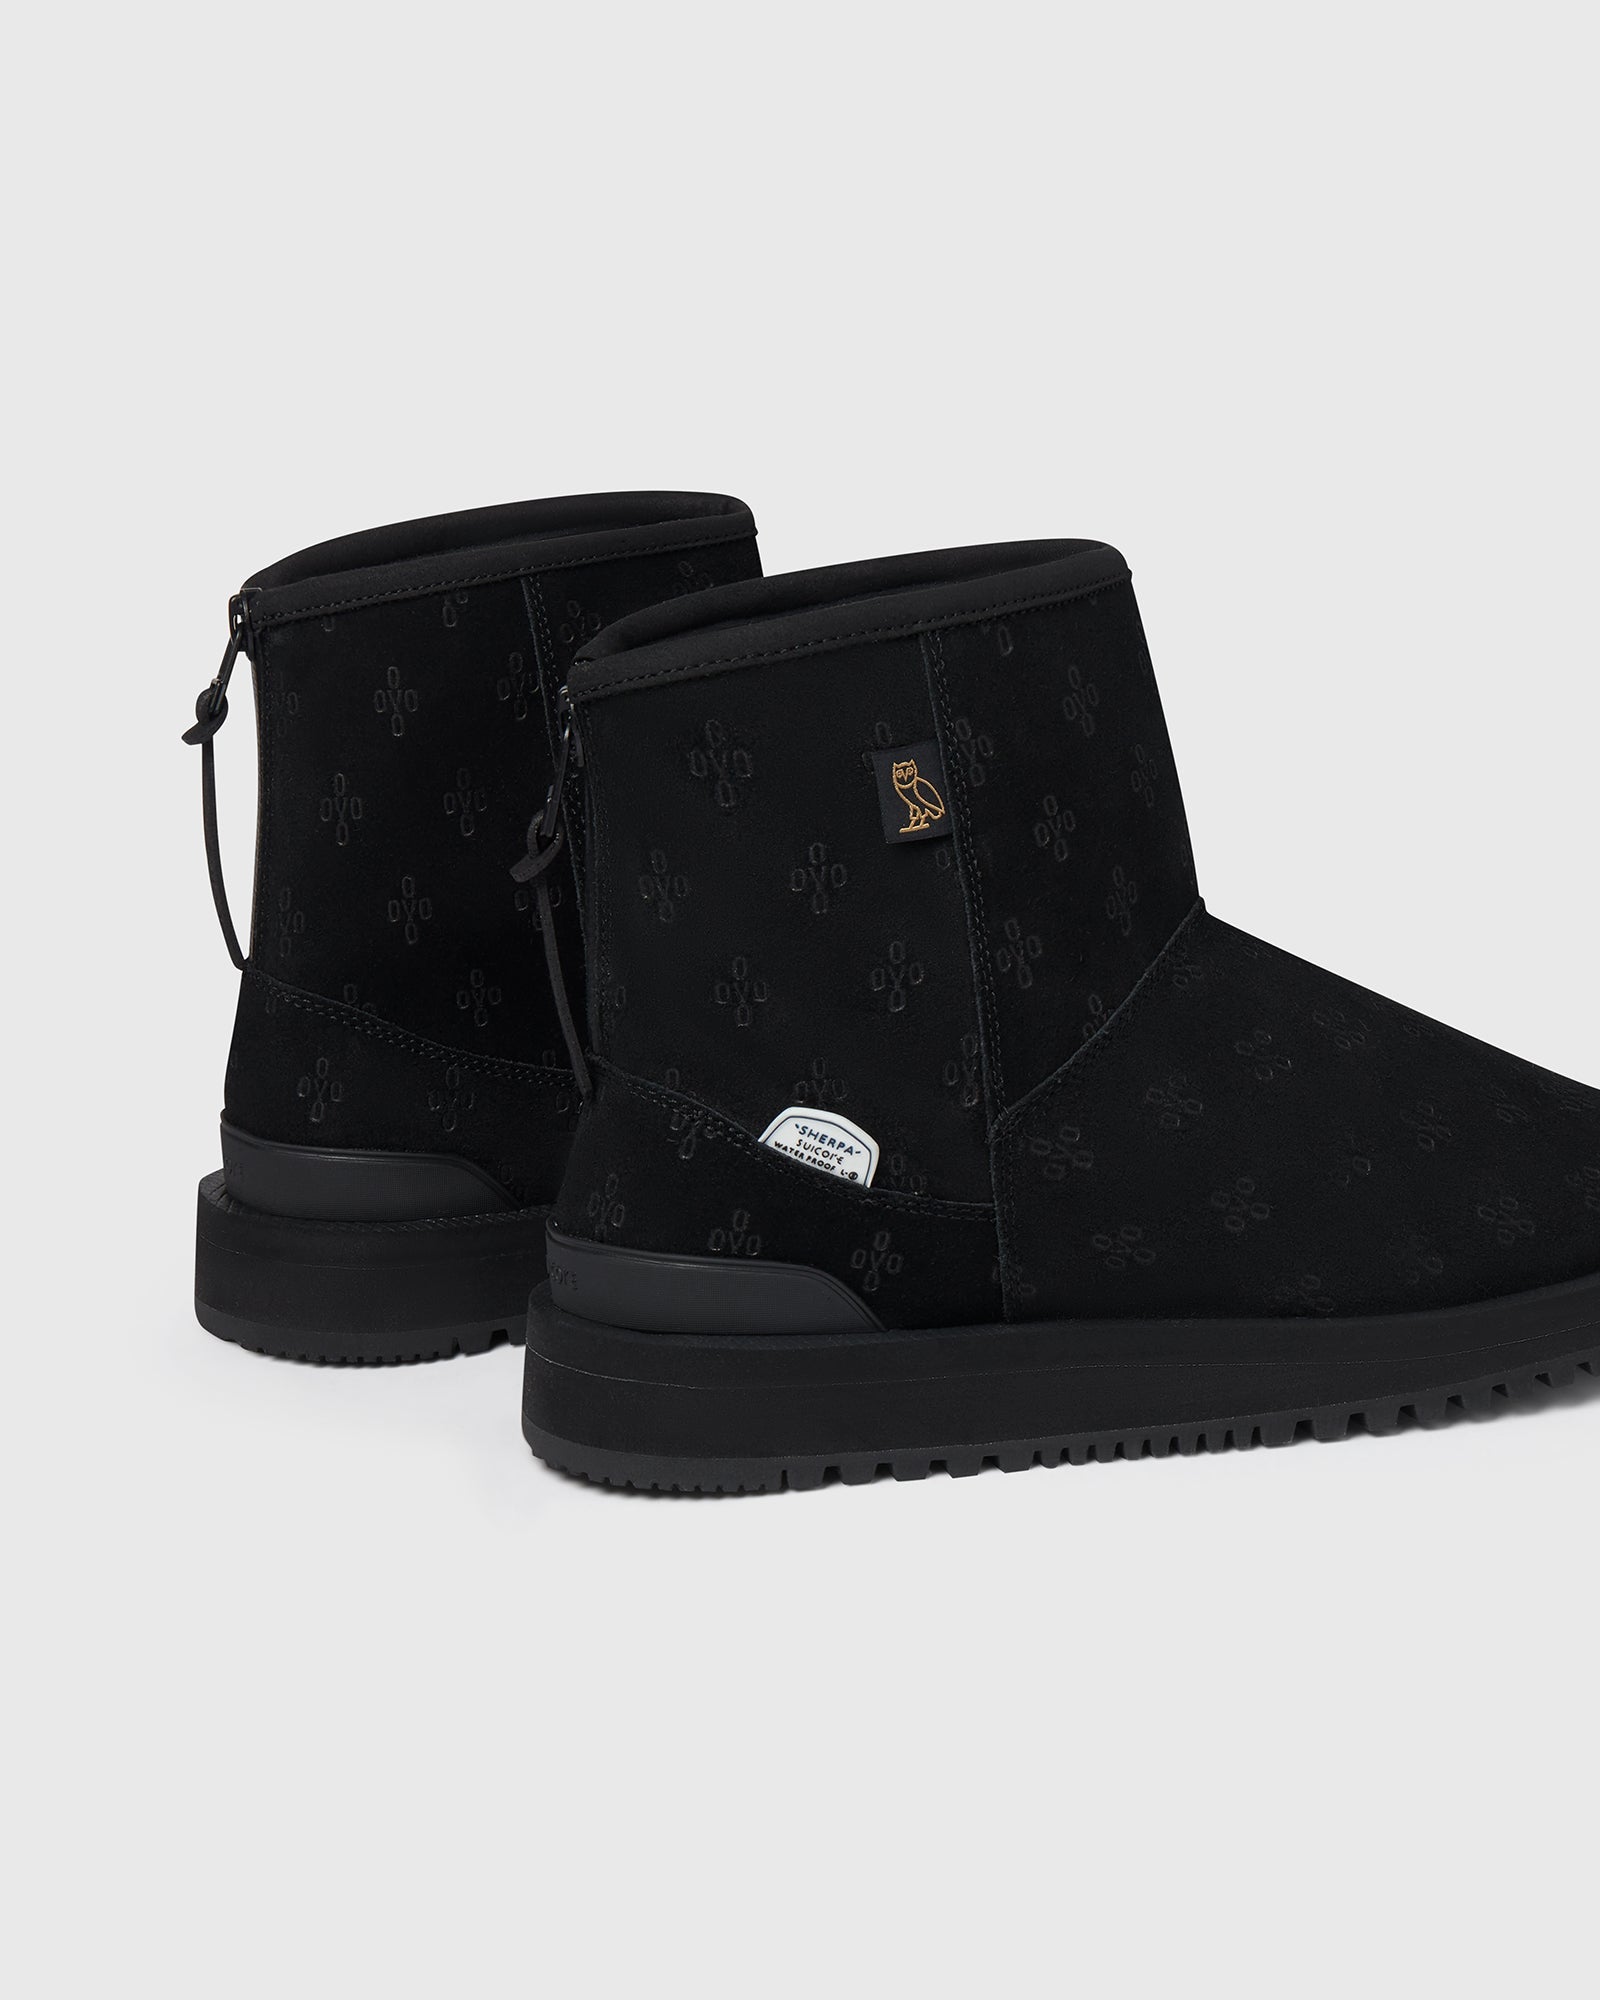 SUICOKE OVO Edition ELS-Mwpab-MID in Black OG-080MWPAB-OVO | Shop from eightywingold an official brand partner for SUICOKE Canada and US.